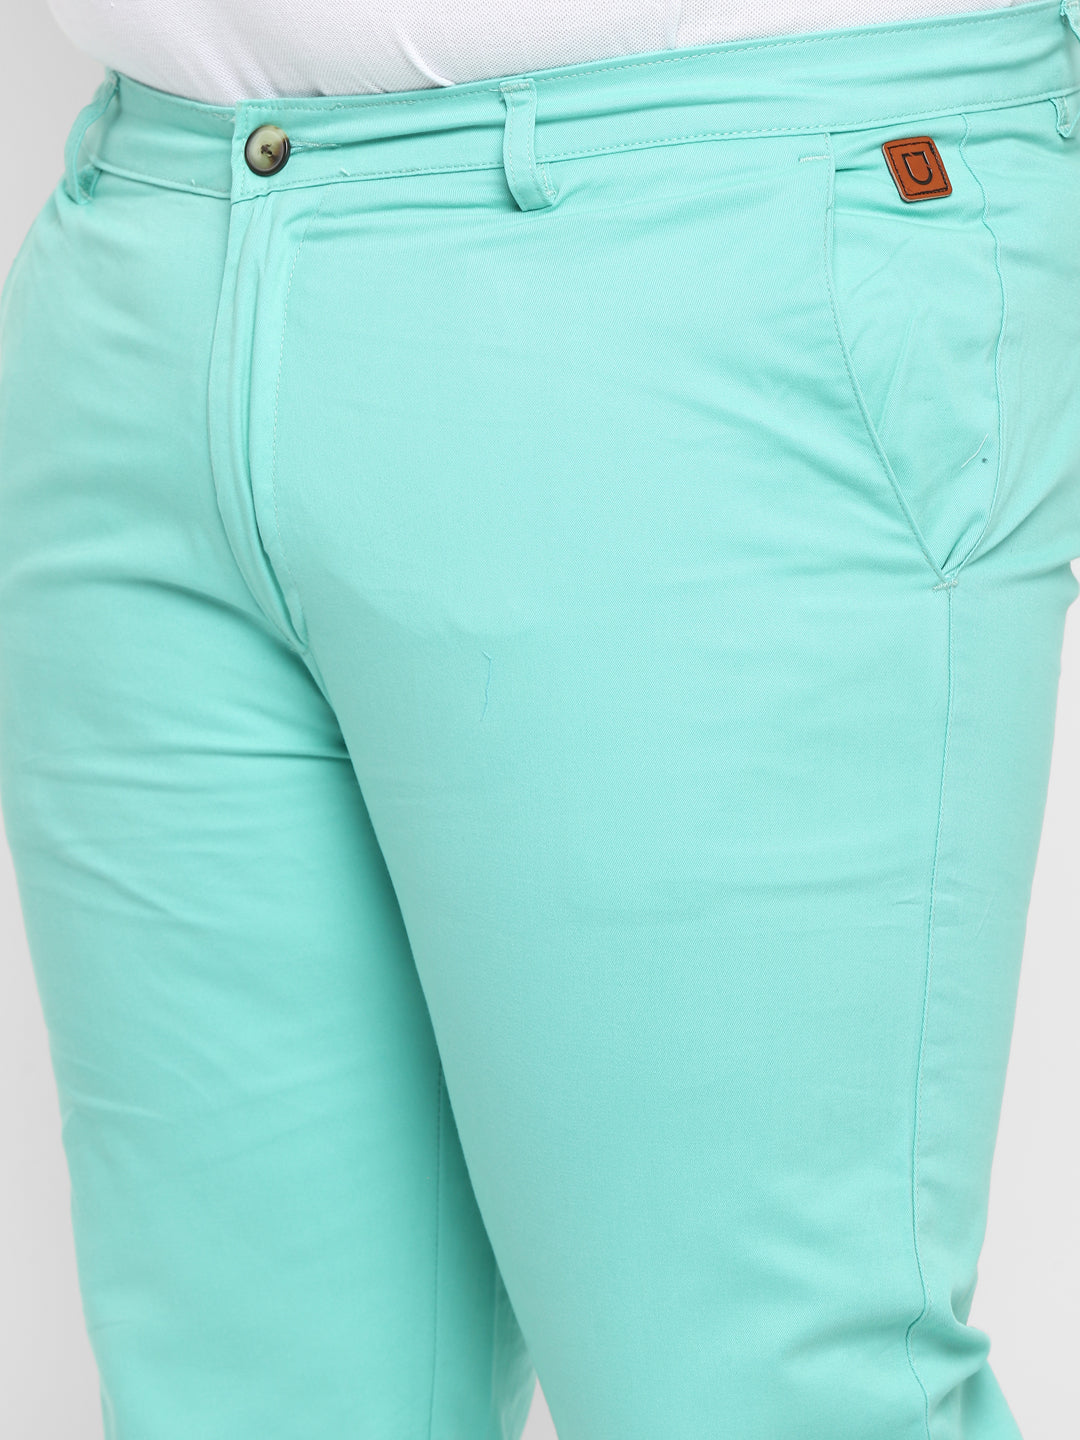 Plus Men's Teal Green Cotton Regular Fit Casual Chinos Trousers Stretch